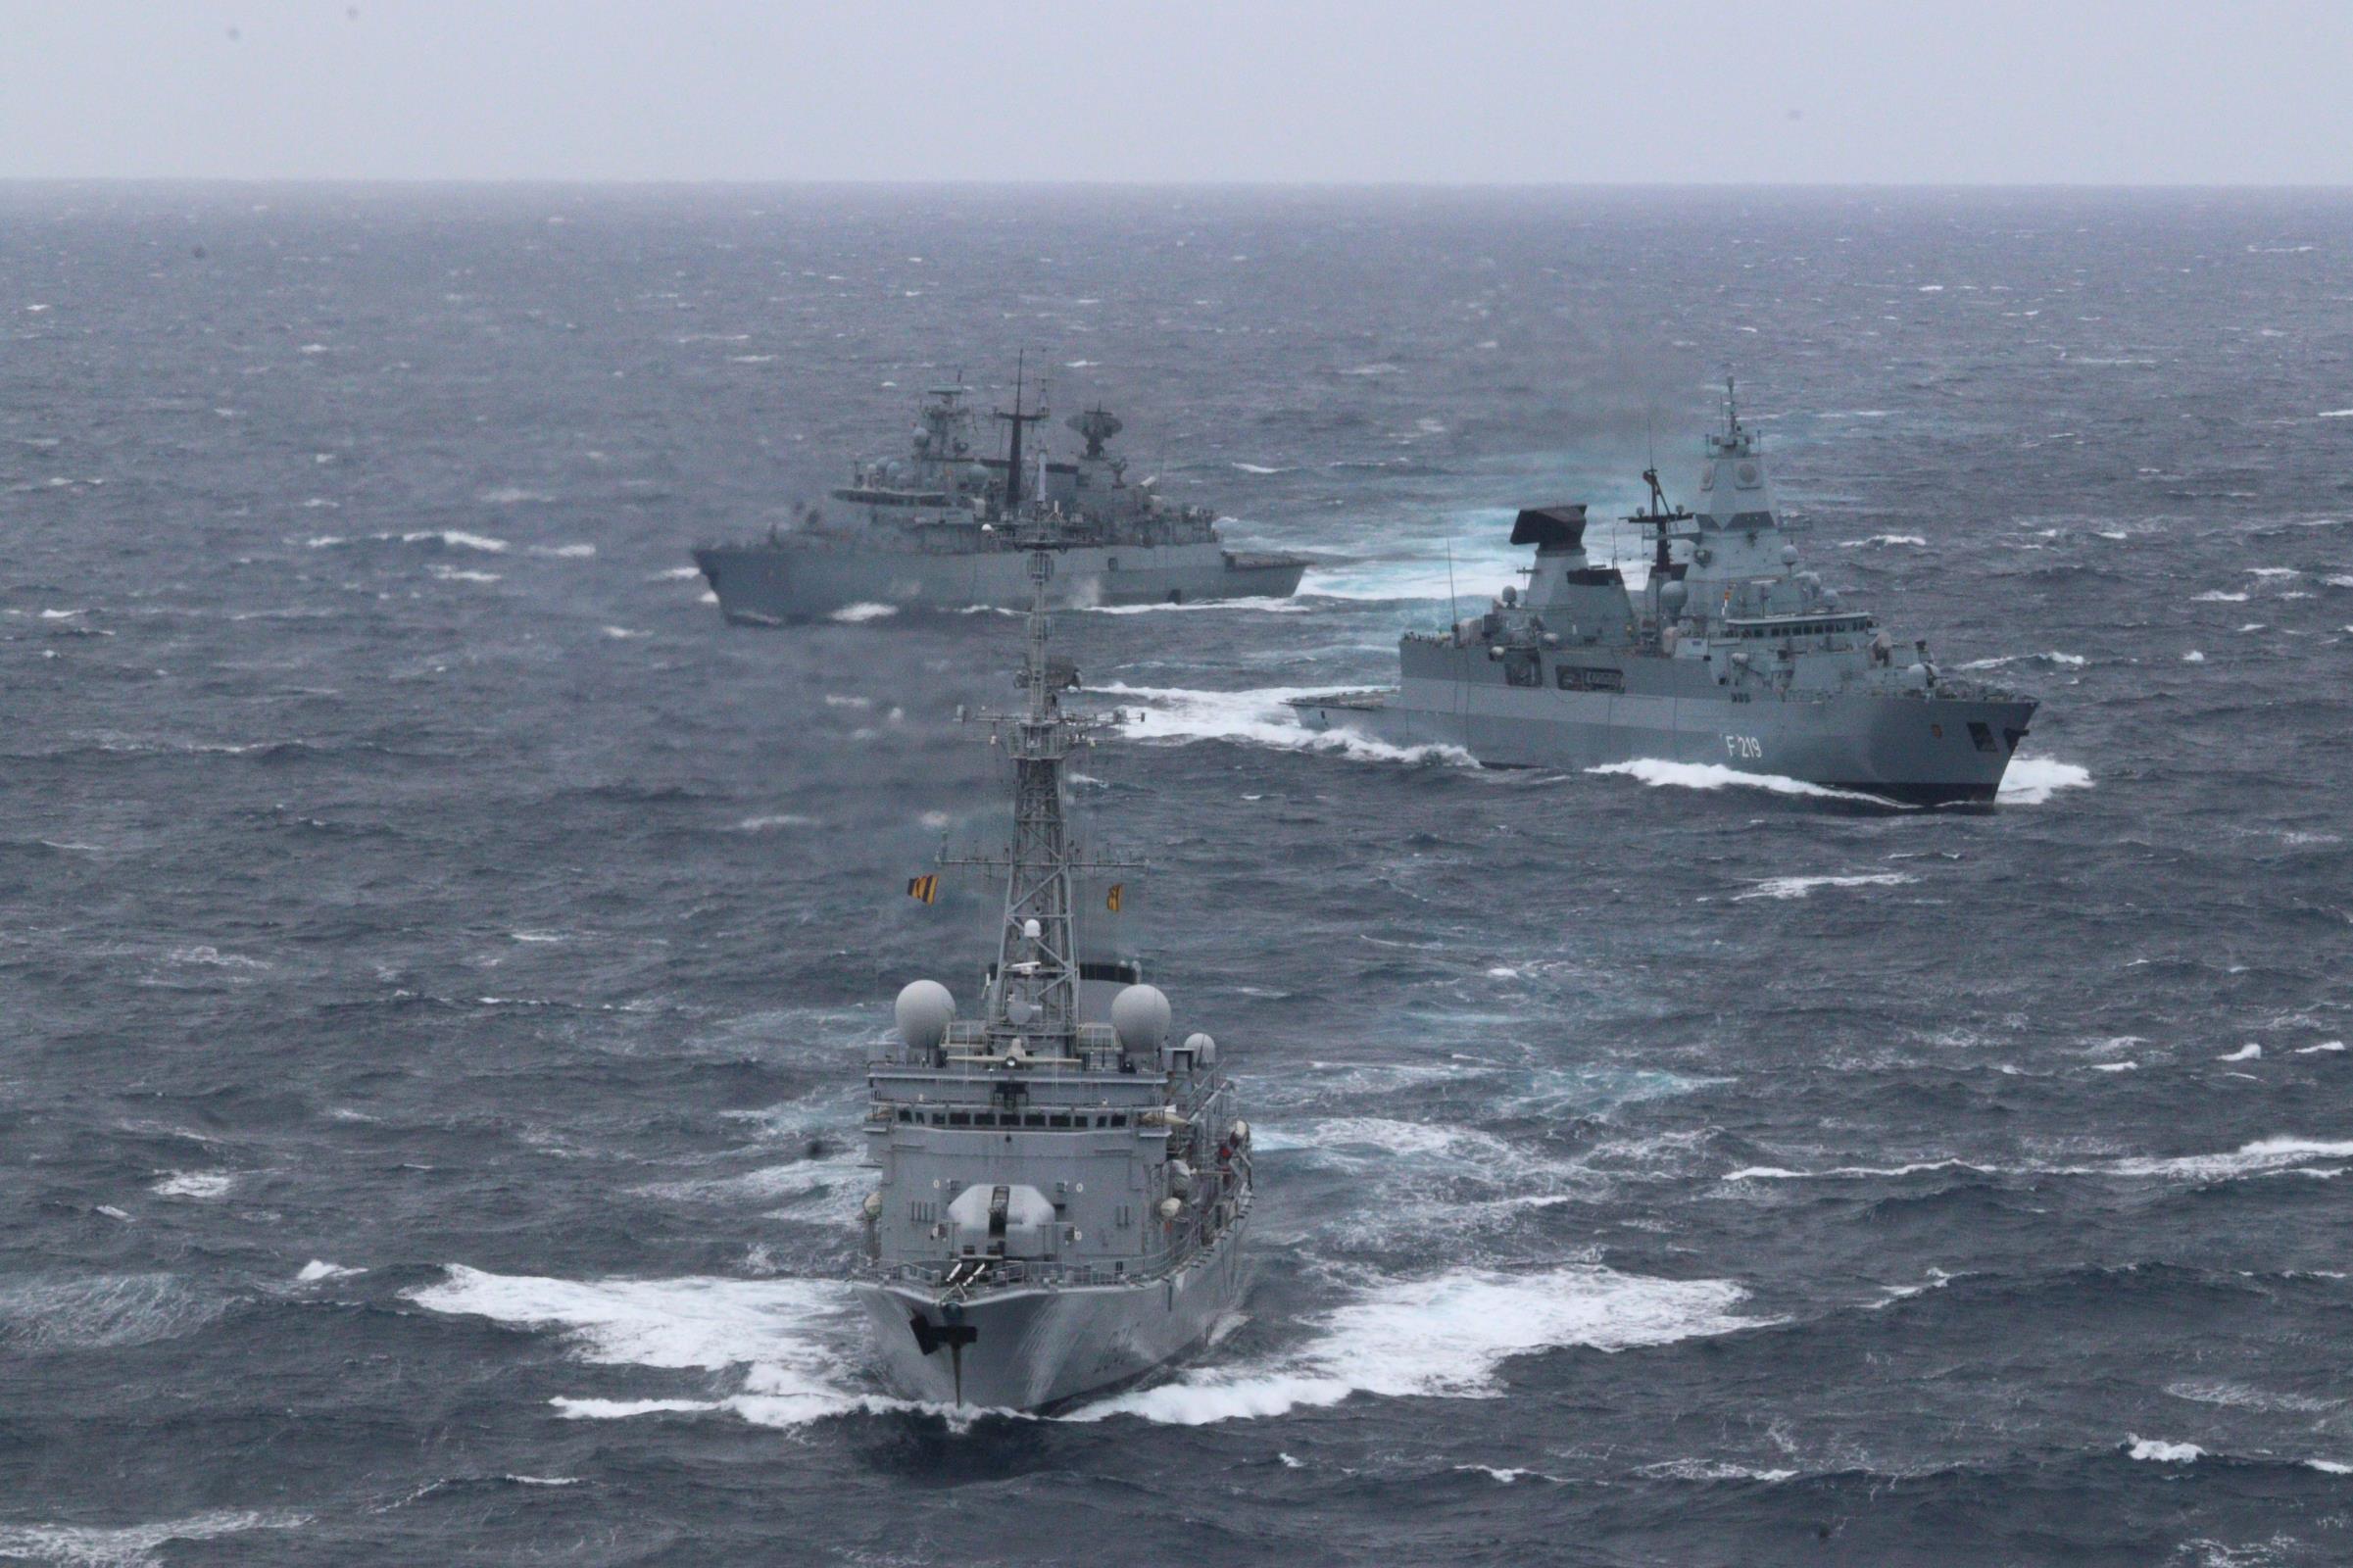 Allied ships transit the north Atlantic Ocean in support of exercise Northern Viking 22. (Courtesy photo by French Navy) 220414-N-NO901-1013 